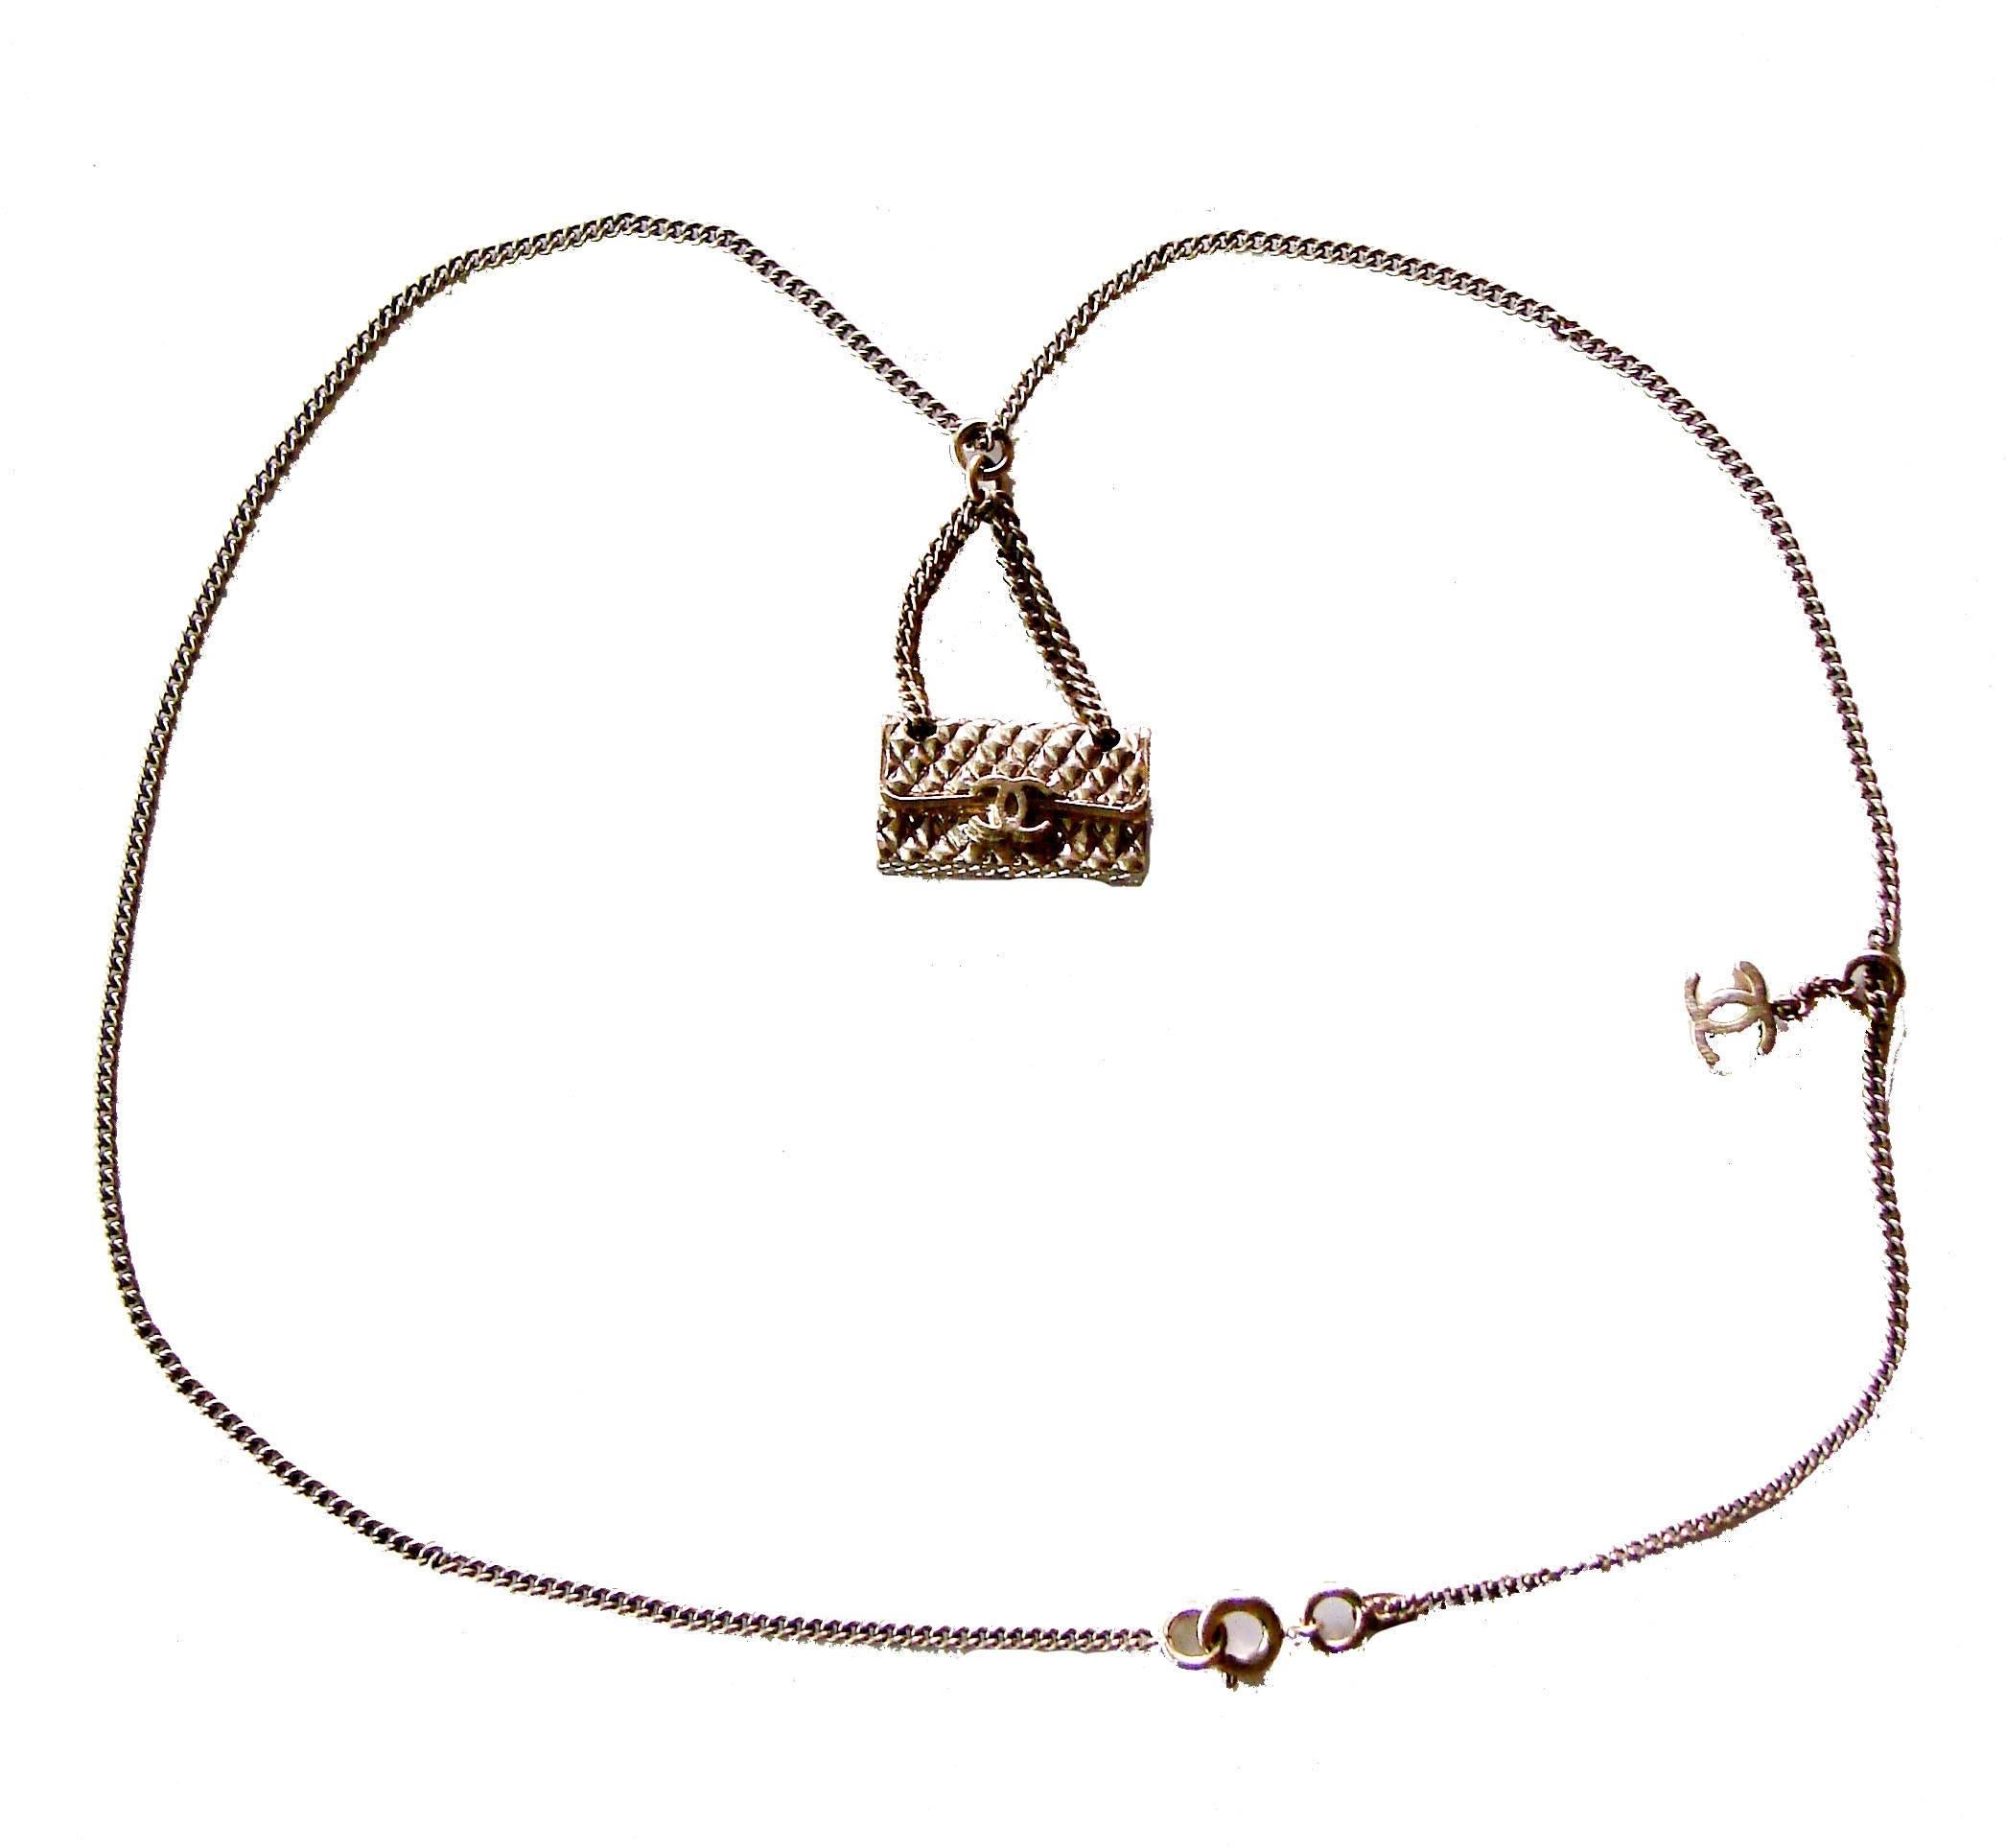 This necklace is so pretty! From Chanel's 2005 collection, it features a miniature charm of their signature 2.55 quilted bag that's attached with two dainty chains, and a separate tiny brushed metal CC charm! The gold metal is a pale yellow (with